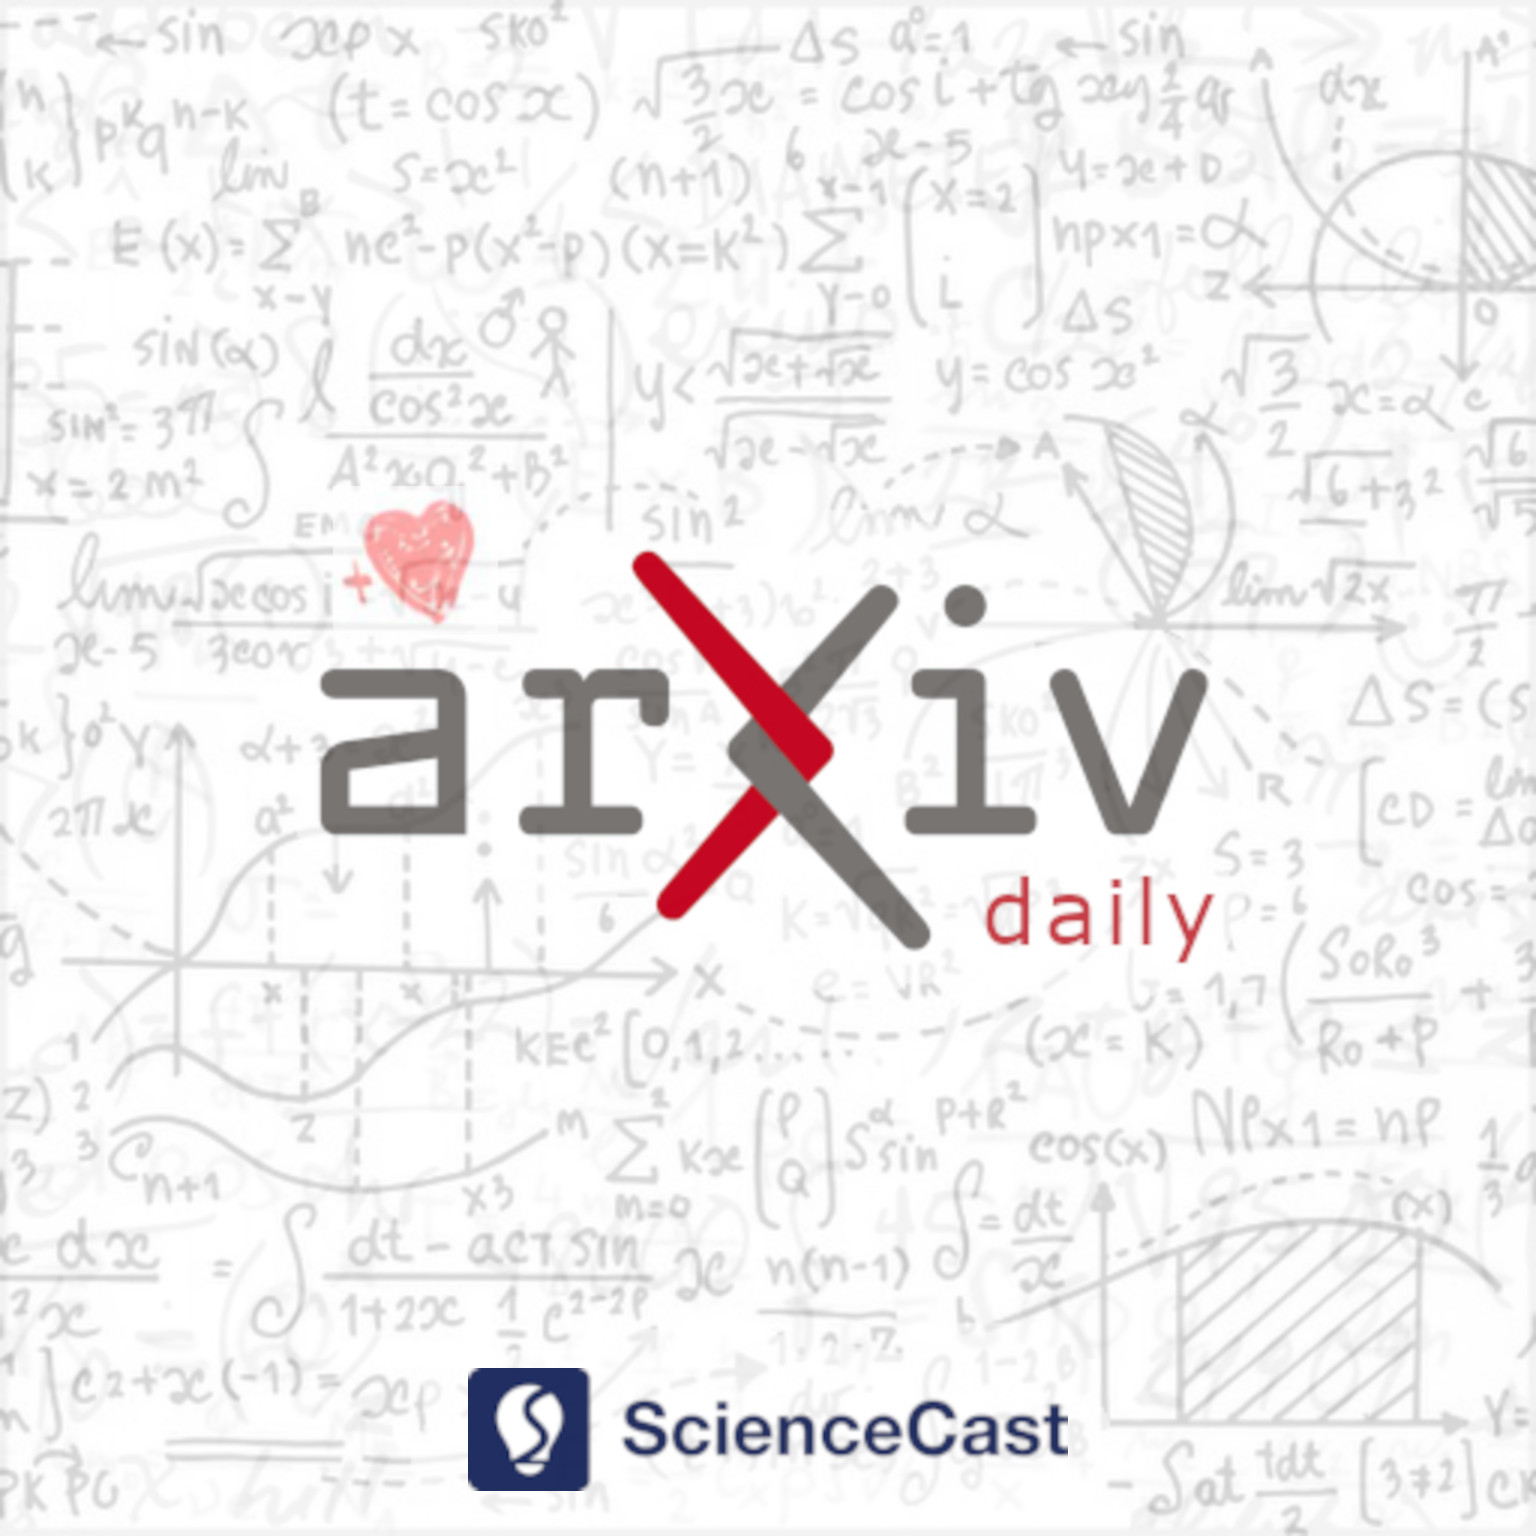 arXiv daily: Statistical Finance